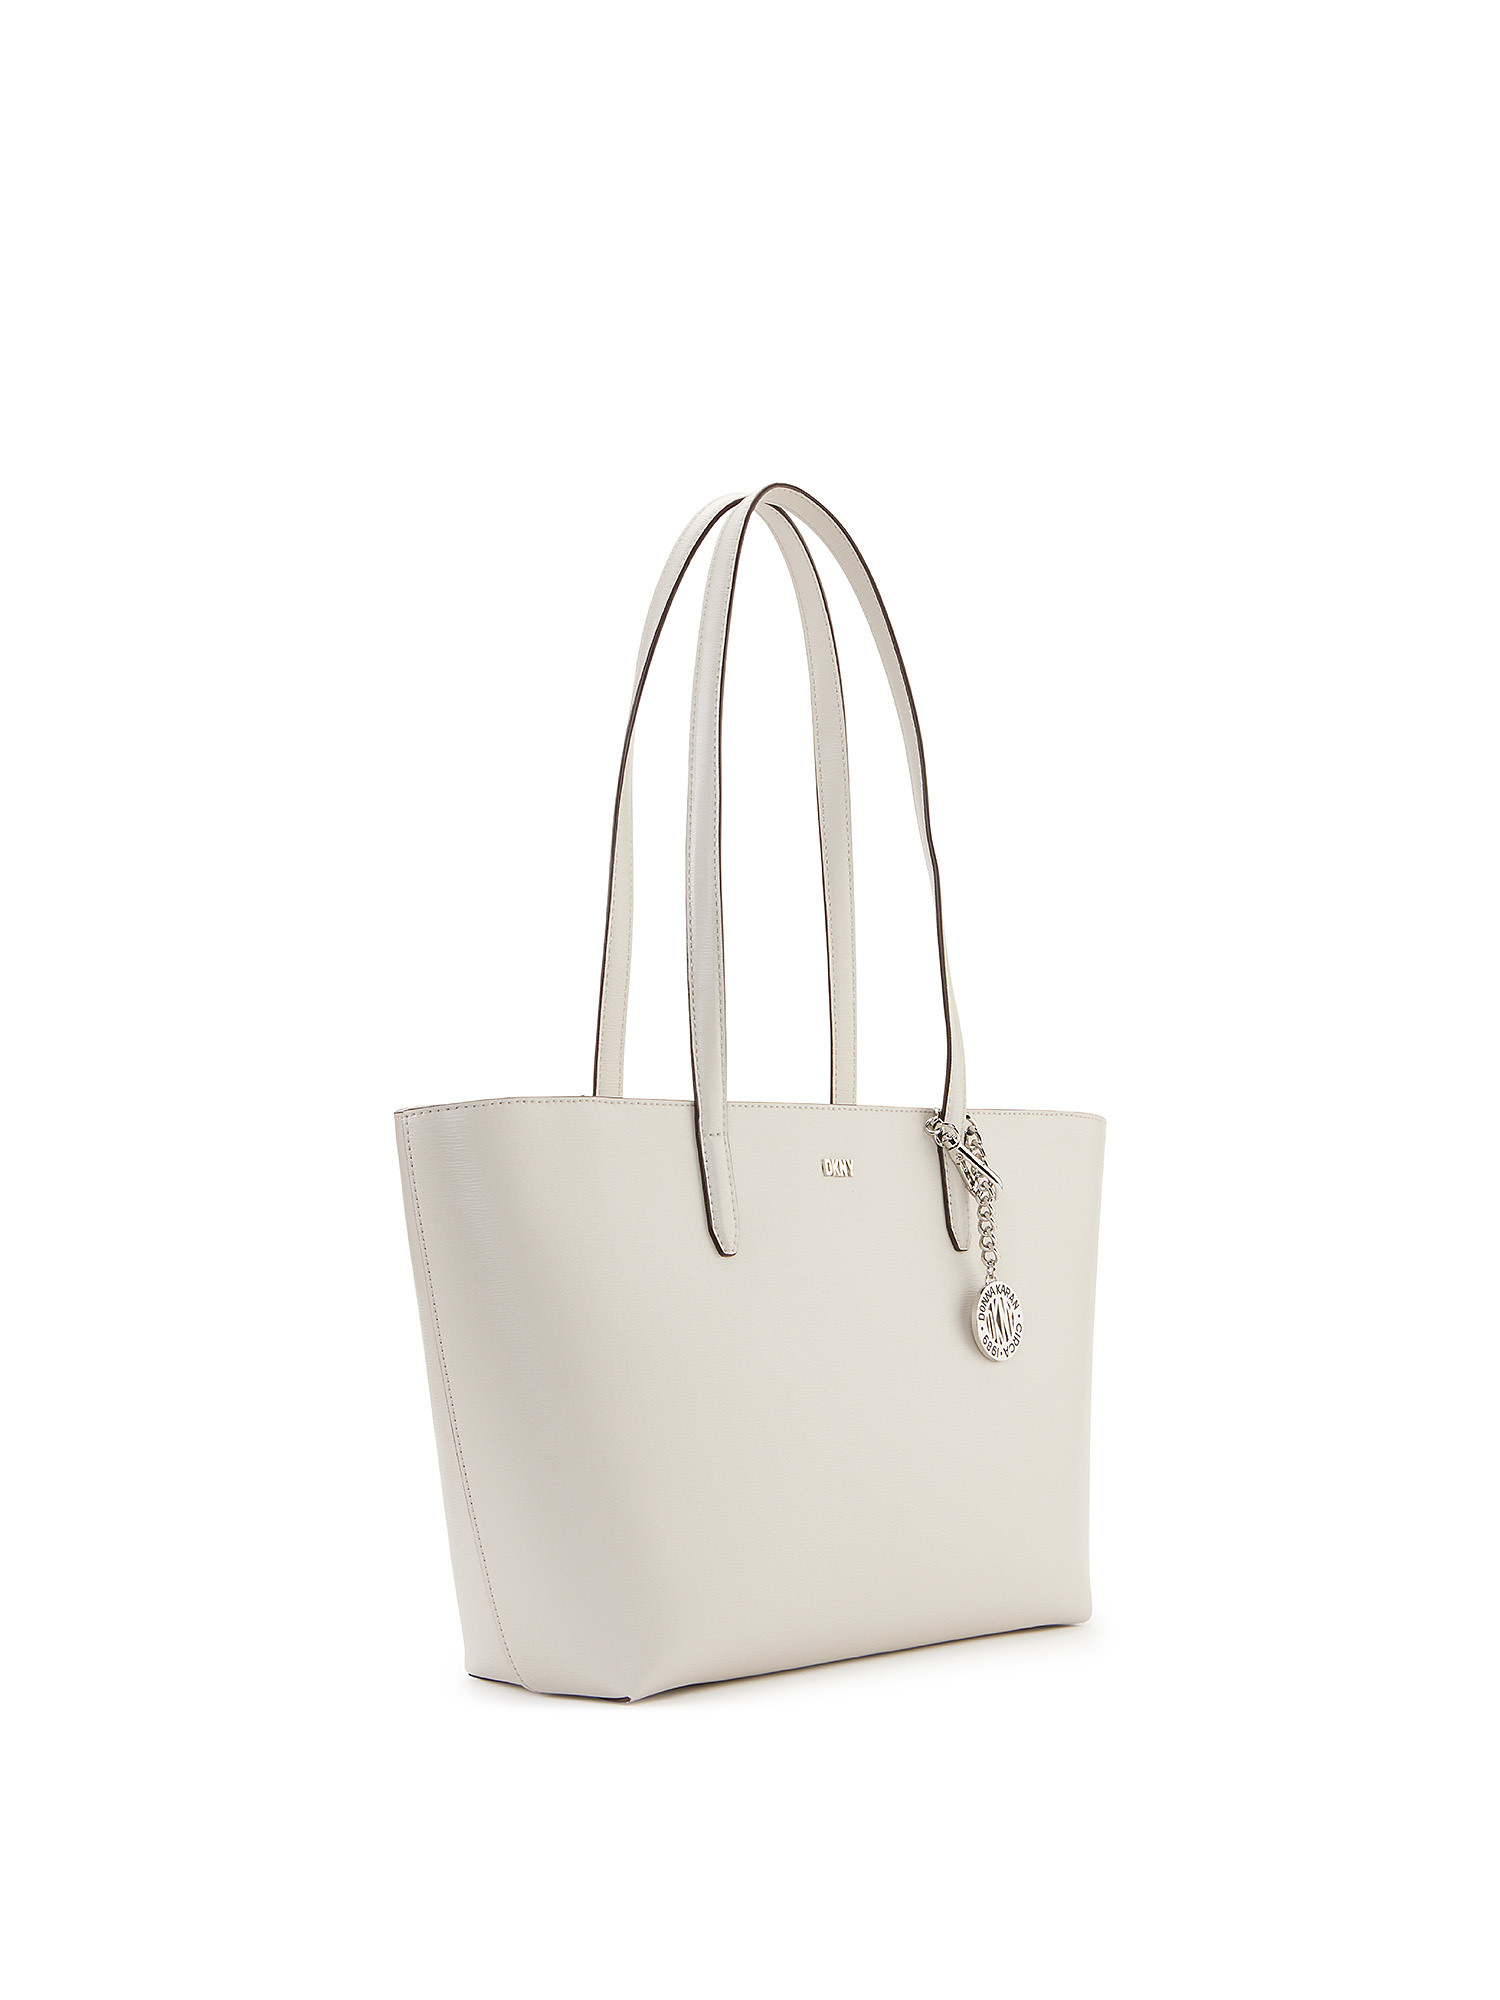 Dkny - Tote bag with removable accessory, White, large image number 2